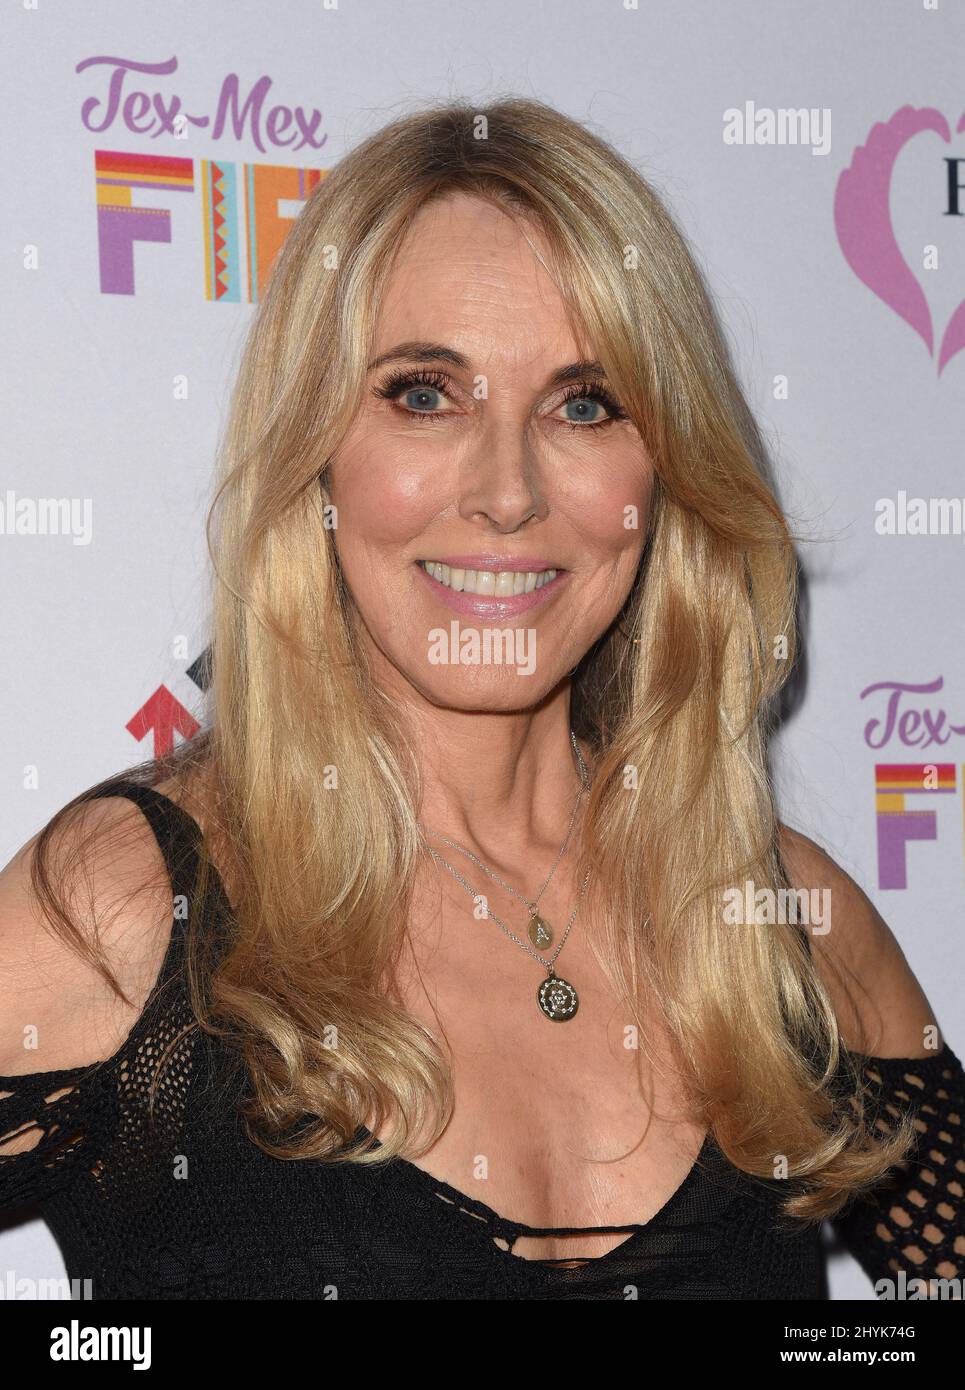 Alana Stewart at The Farrah Fawcett Foundation's Tex-Mex Fiesta held at the Wallis Annenberg Center for the Performing Arts on September 6, 2019 in Beverly Hills, USA. Stock Photo